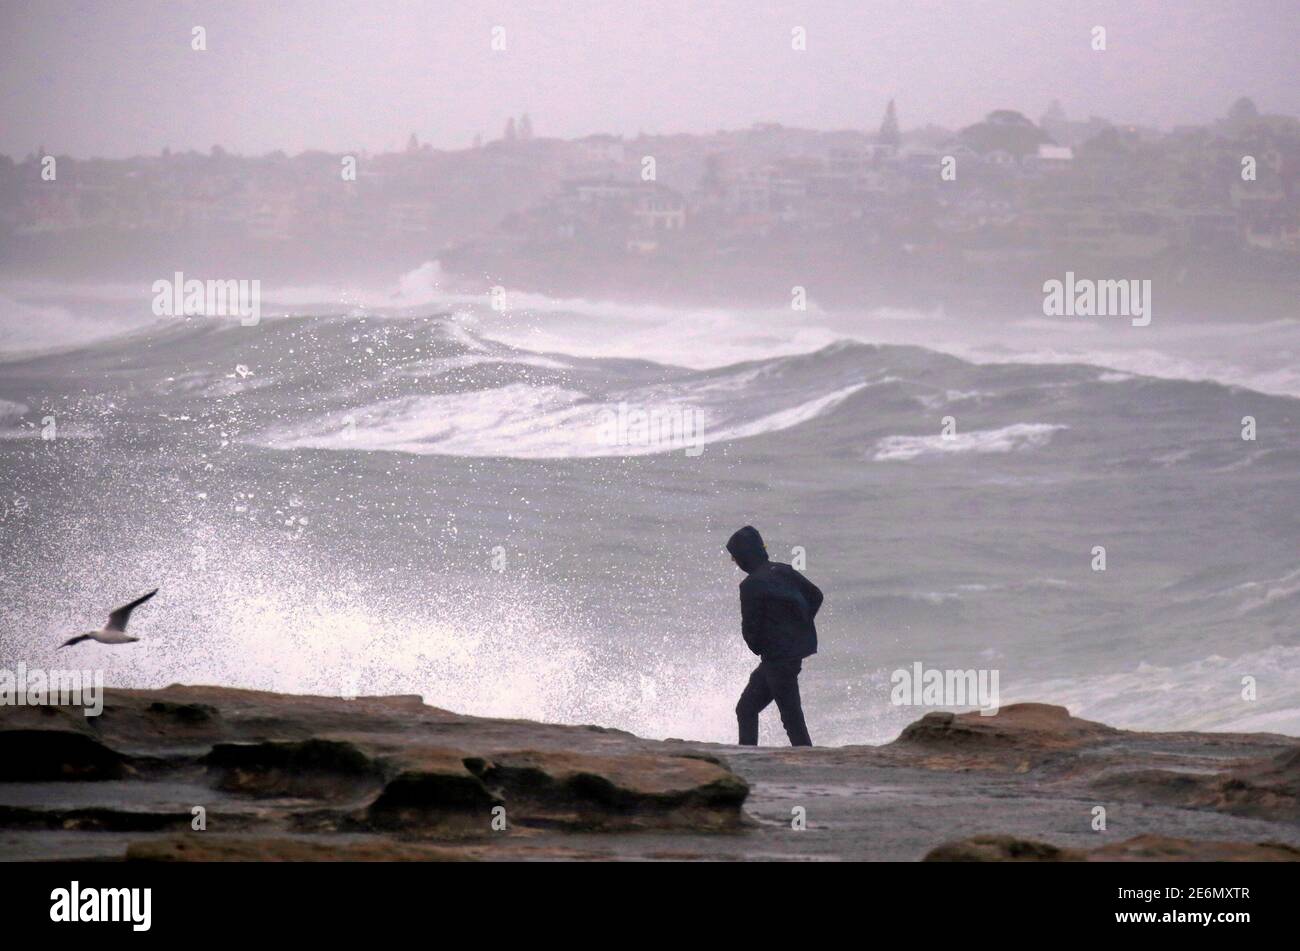 A man walks along a cliff as large waves batter the coastline in severe weather bringing strong winds and and heavy rain hits the eastern coast of Australia near Coogee Beach in Sydney, June 5, 2016.     REUTERS/David Gray Stock Photo